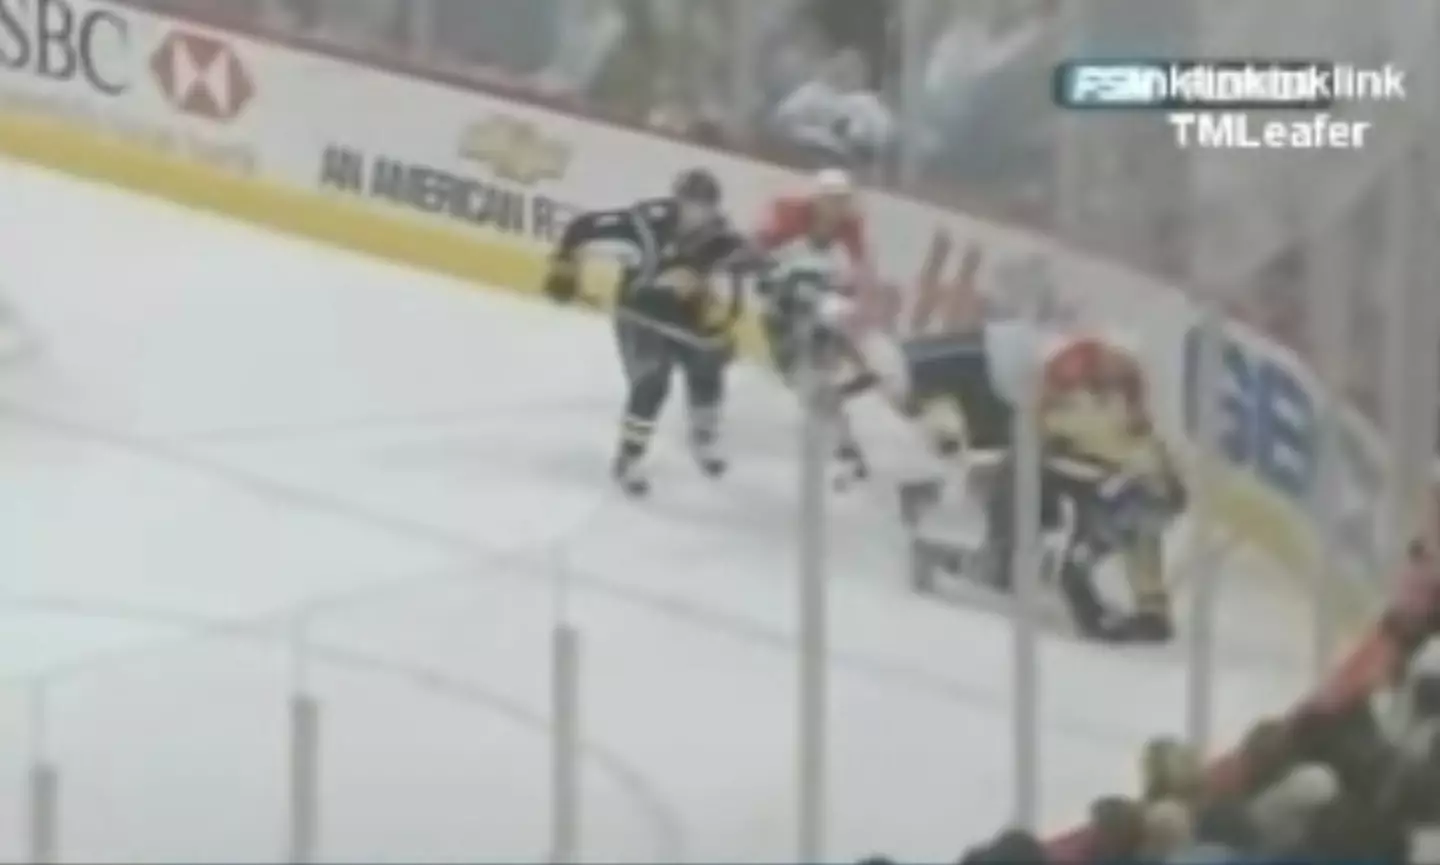 The star collided with Olli Jokinen's skate, slicing his carotid artery.